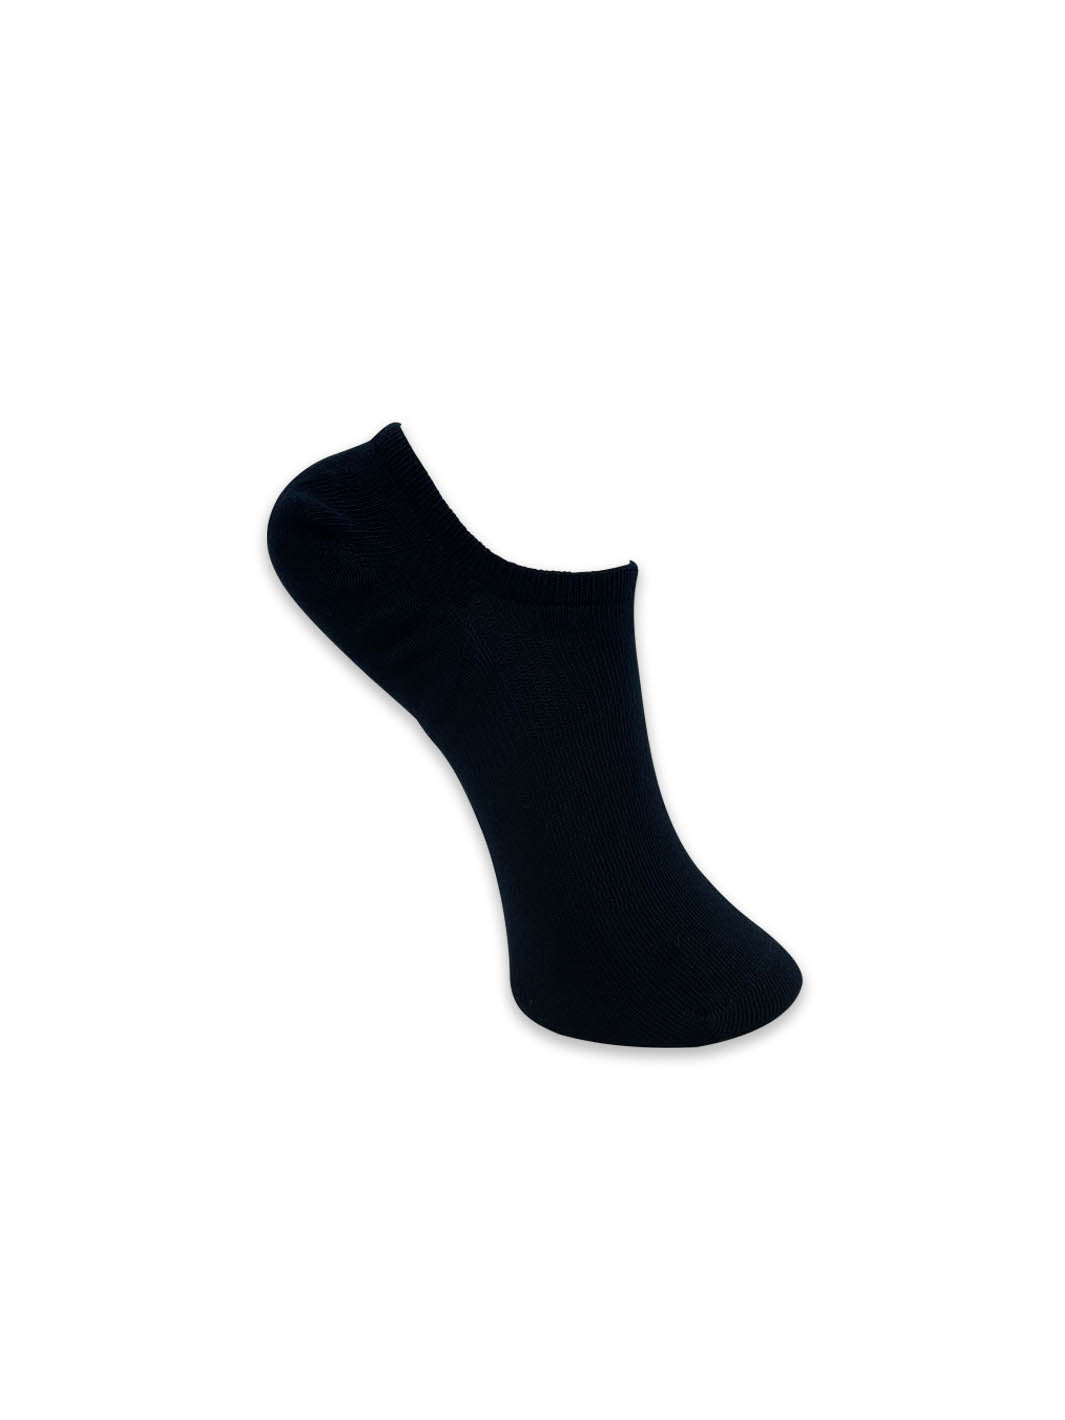 The Low Show Sock - Navy - 2 x Pair